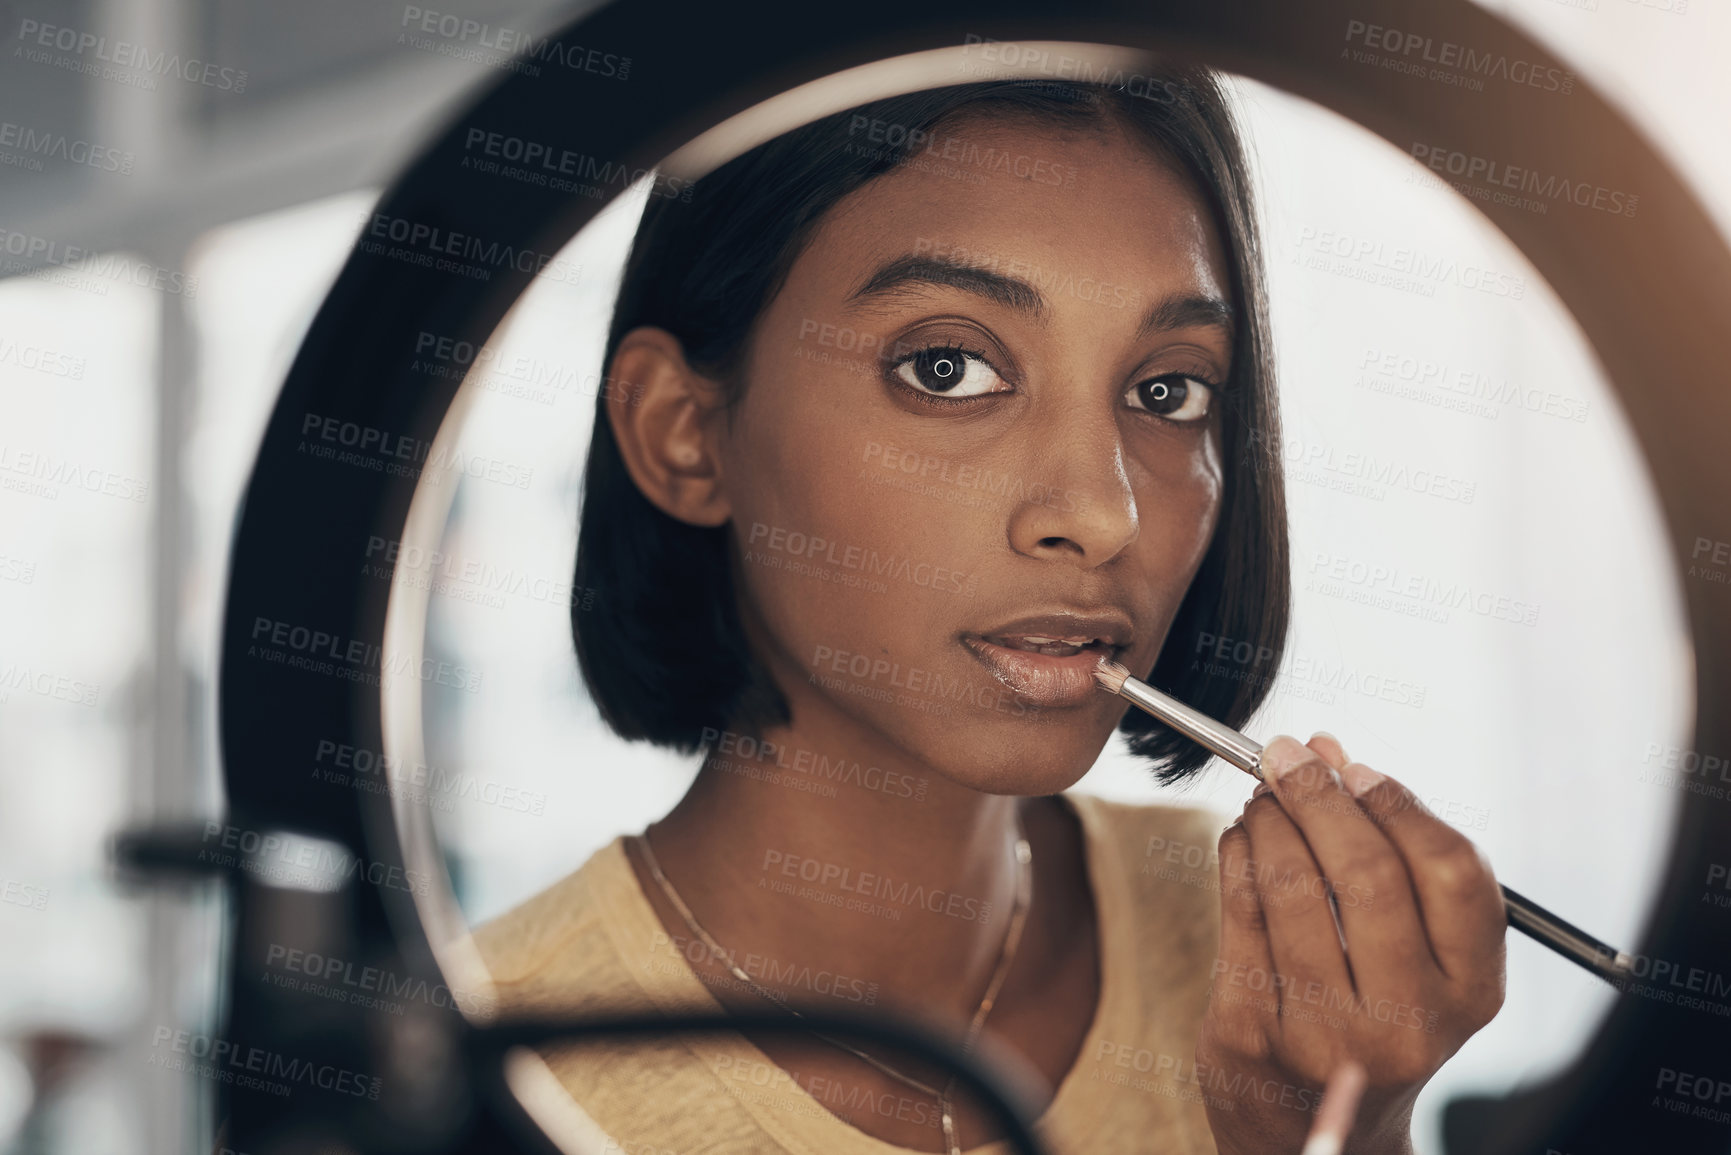 Buy stock photo Shot of a young woman applying makeup while filming a beauty tutorial at home